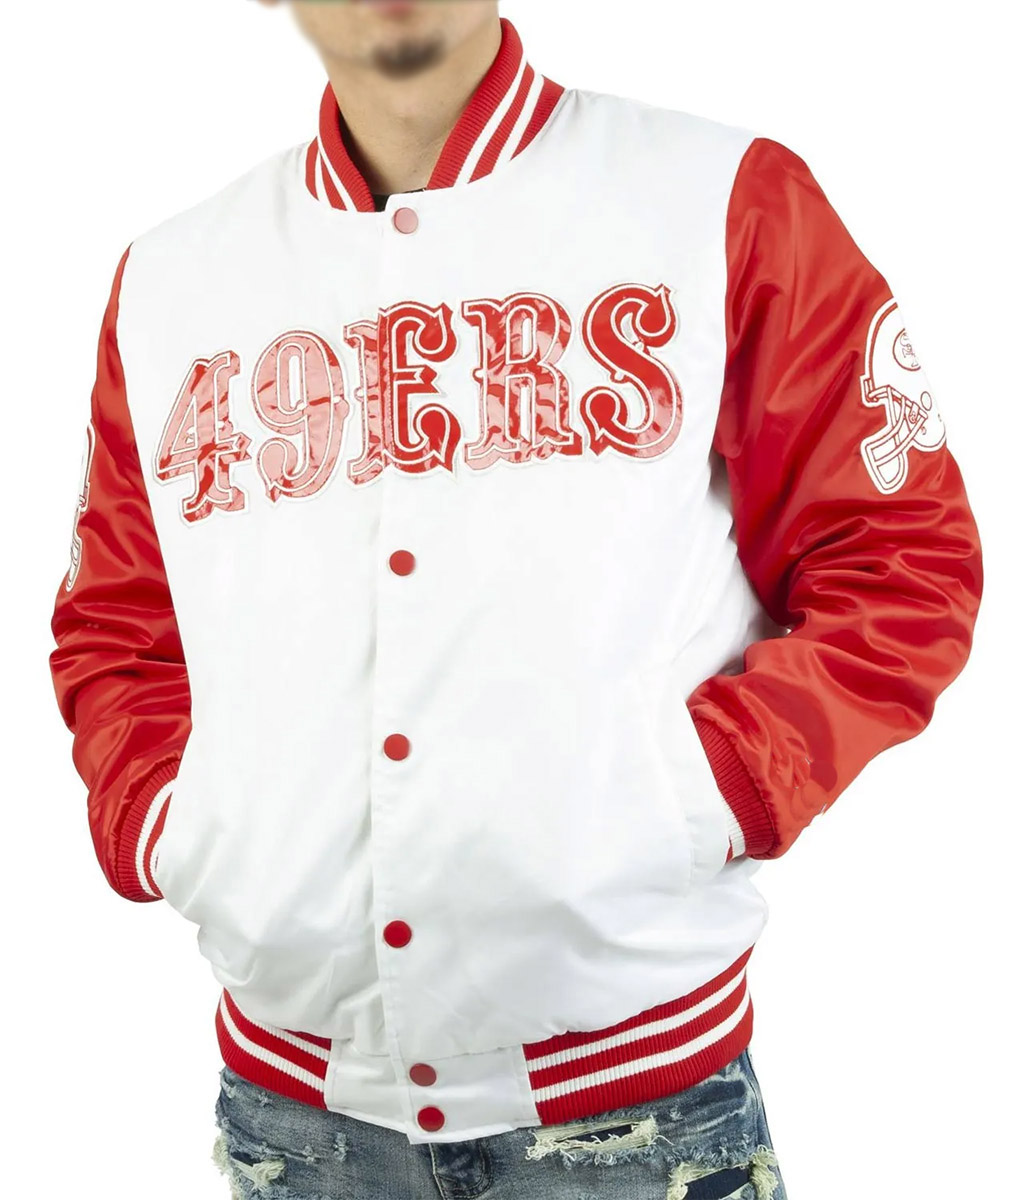 SF 49 White and Red Satin Varsity Jacket